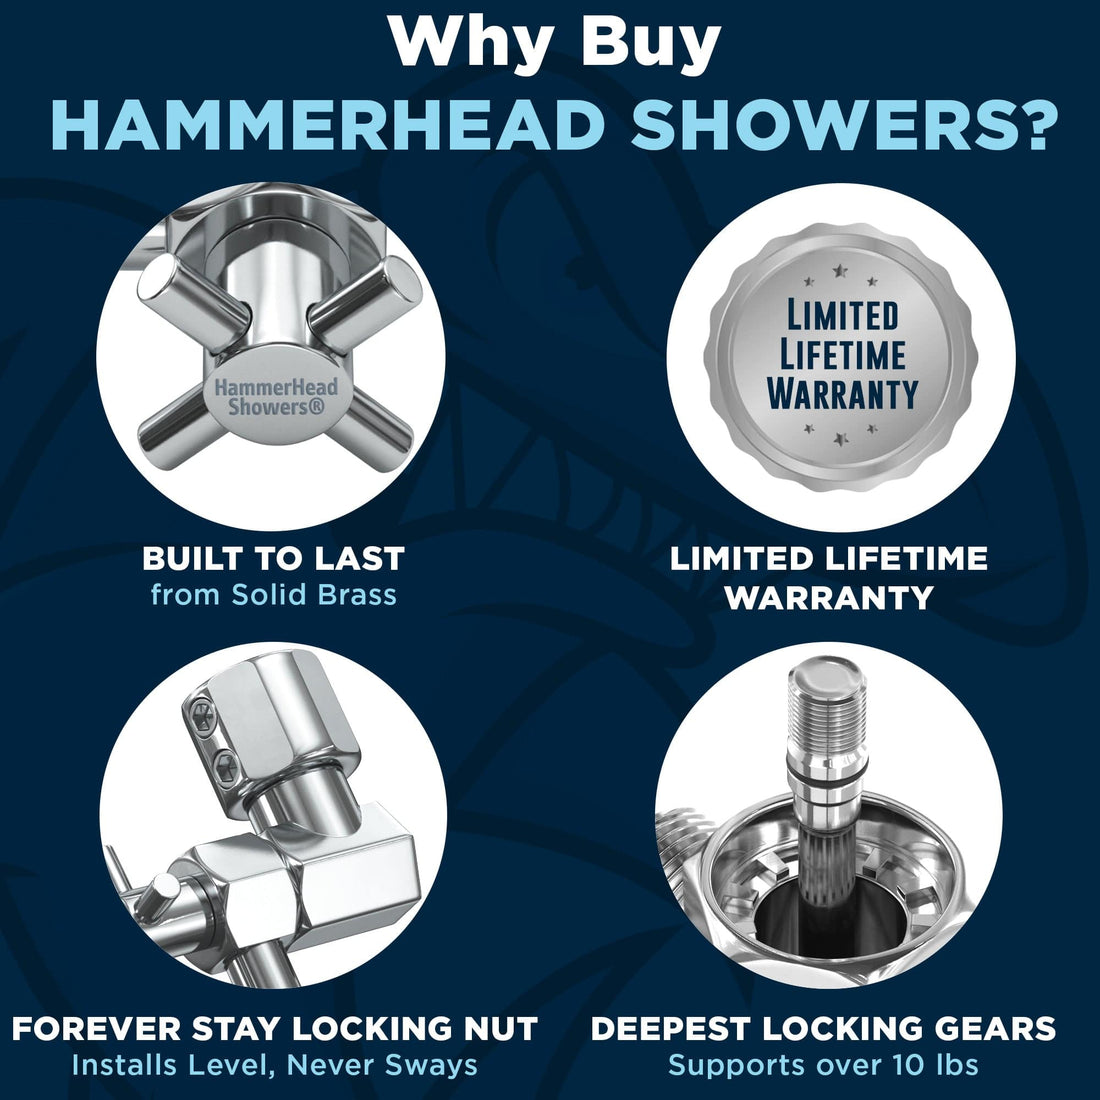 (Why Buy HammerHead Showers) 12 Inch Adjustable Shower Arm Extension Pipe Raise or Lower Shower Head Height Deepest Locking Gears On The Market Chrome / 12 Inch - The Shower Head Store